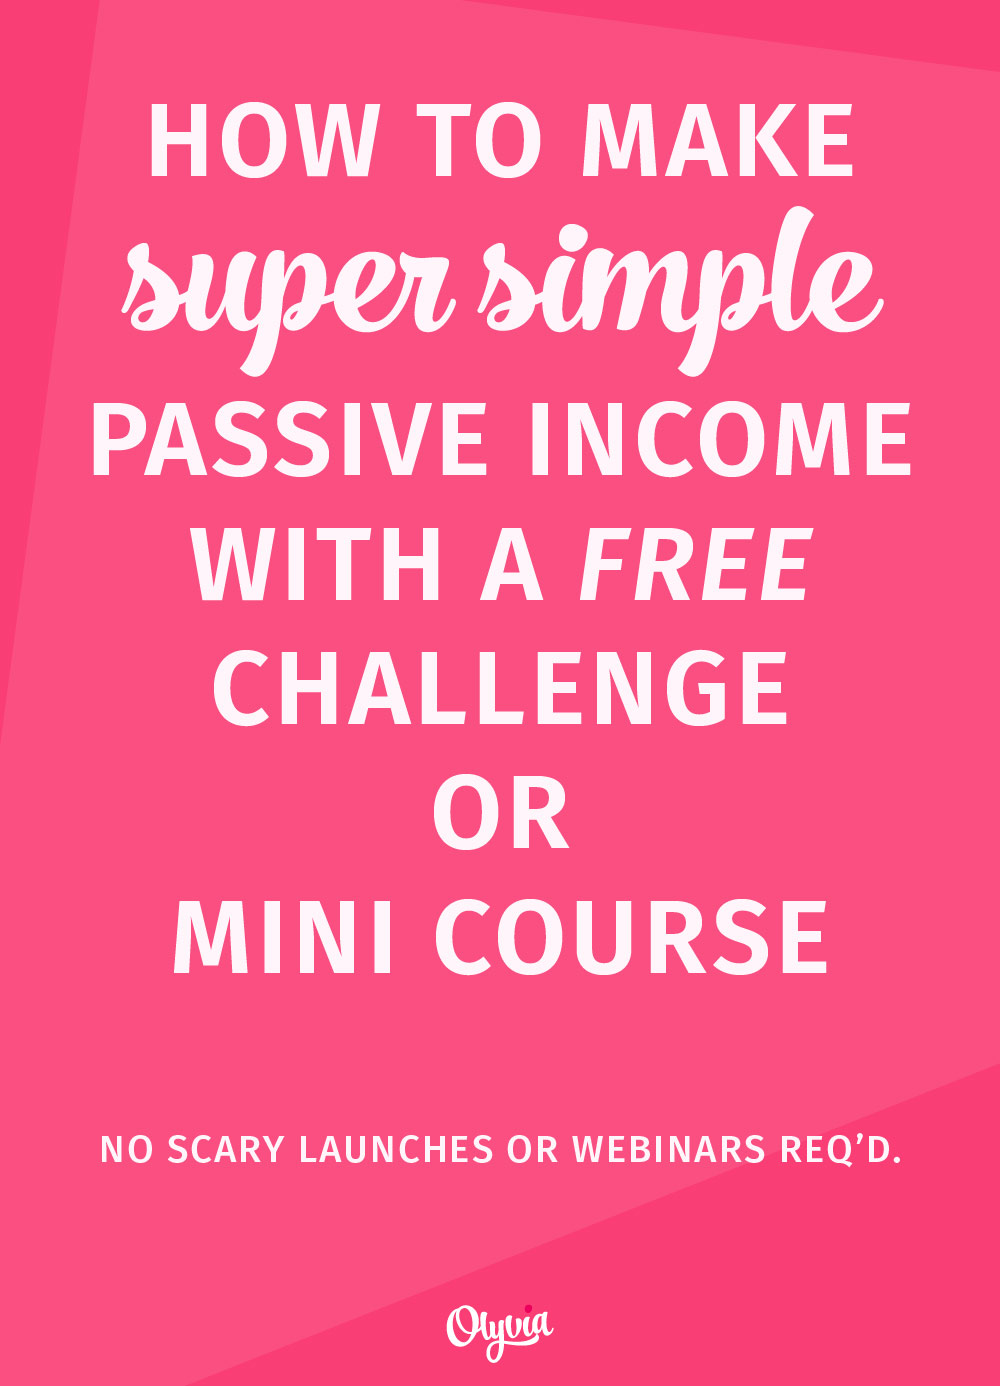 Want a simple, no-hassle way to make passive income for your blog or business AND grow your email list? It's not as hard as you think, and you can do it without a scary launch or crazy webinars. (Perfect for introverts + beginners!) Click to read the full tutorial on Olyvia.co